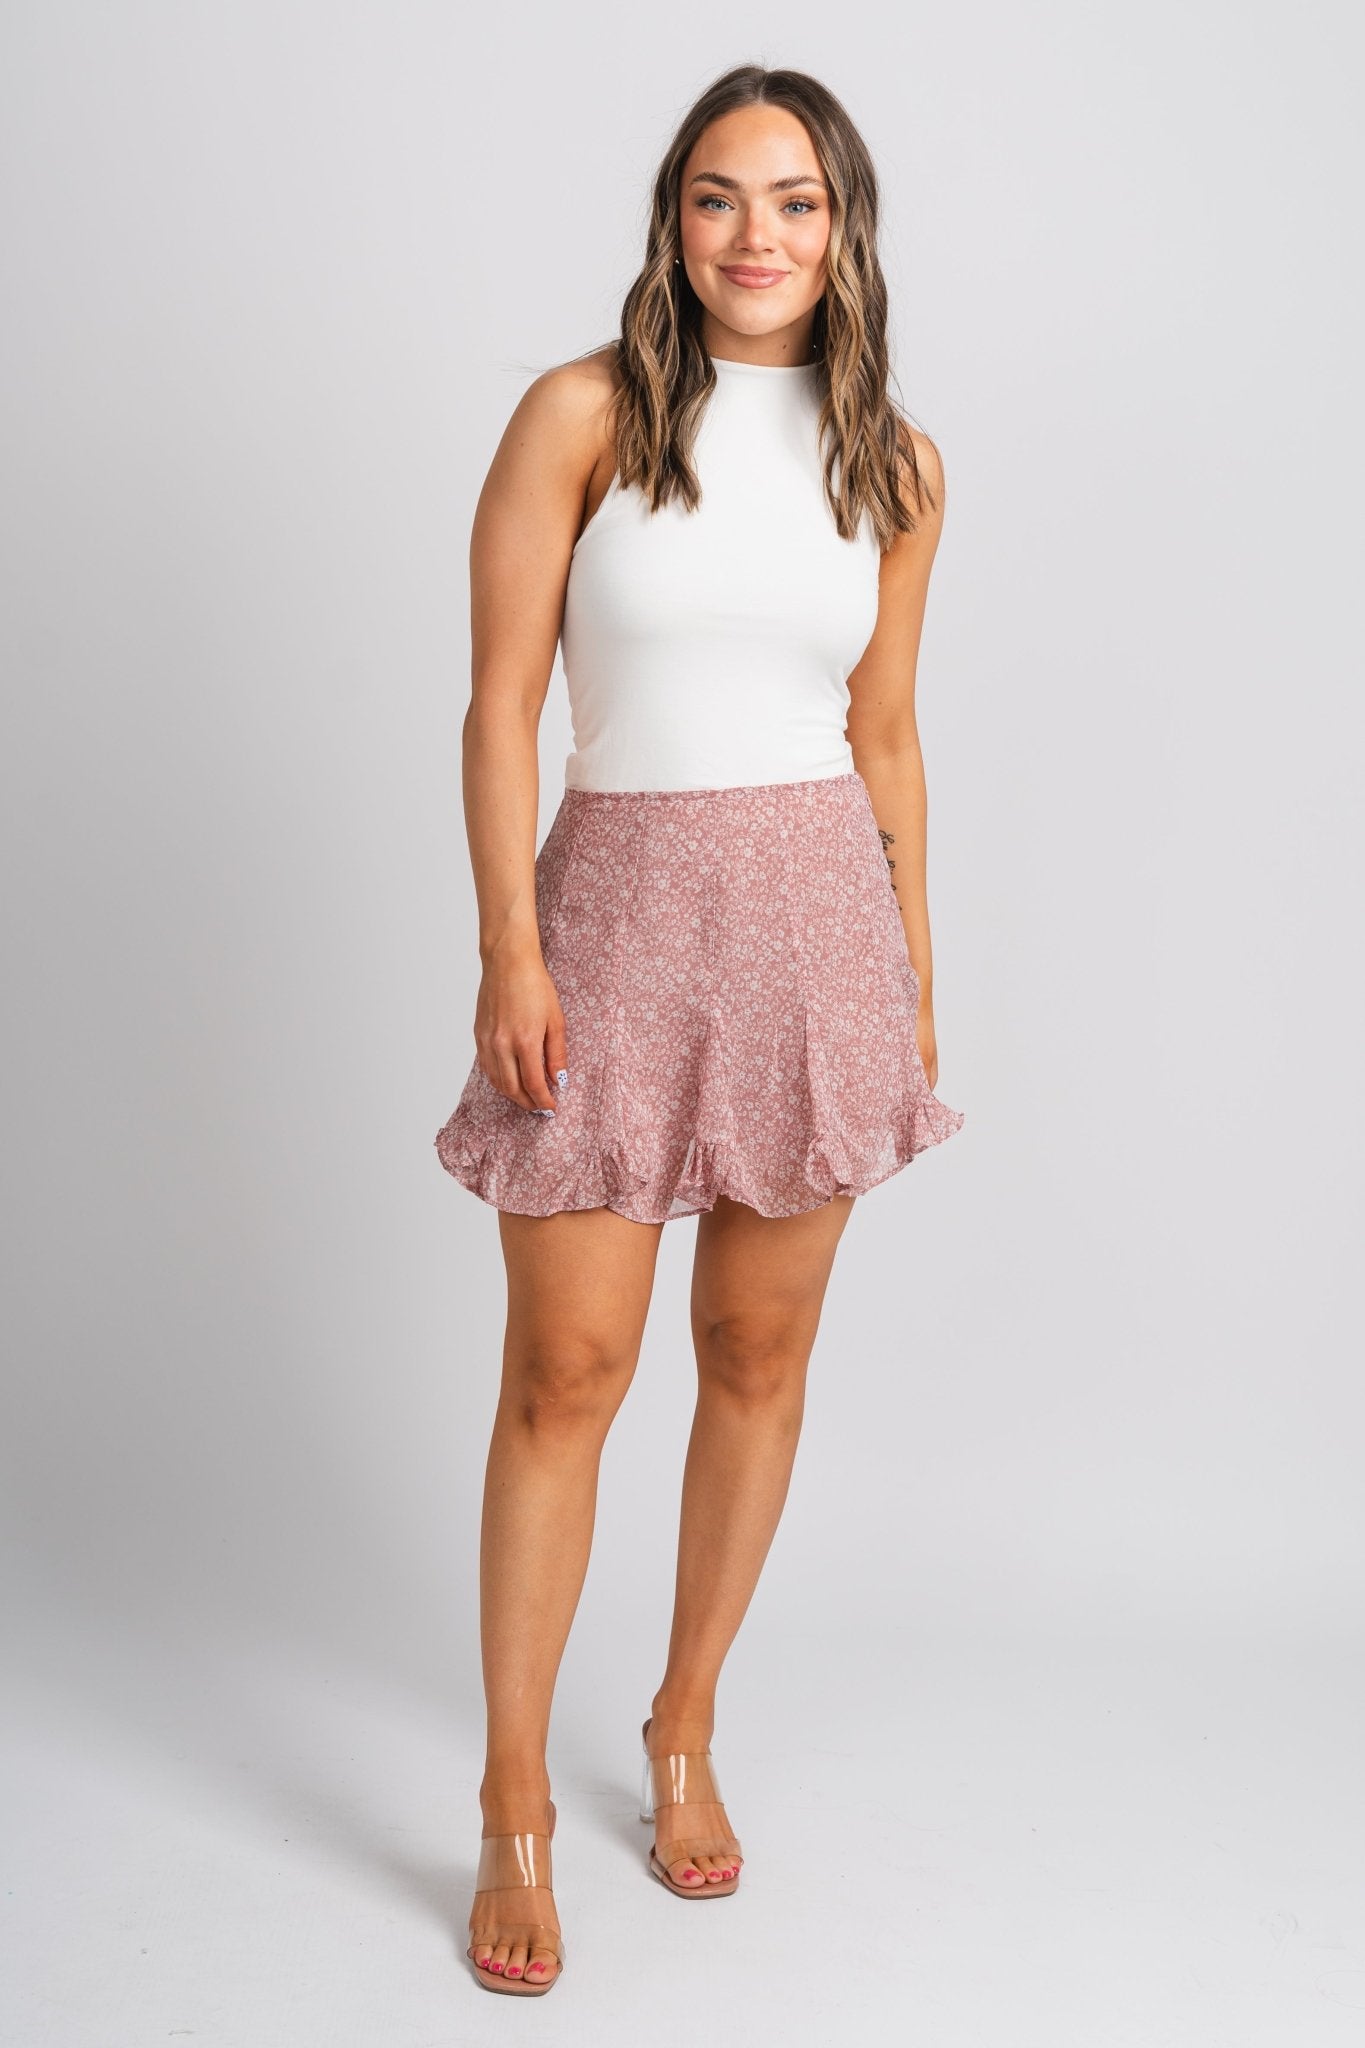 Floral ruffle skirt mauve/cream - Cute Skirt - Trendy Easter Clothing Line at Lush Fashion Lounge Boutique in Oklahoma